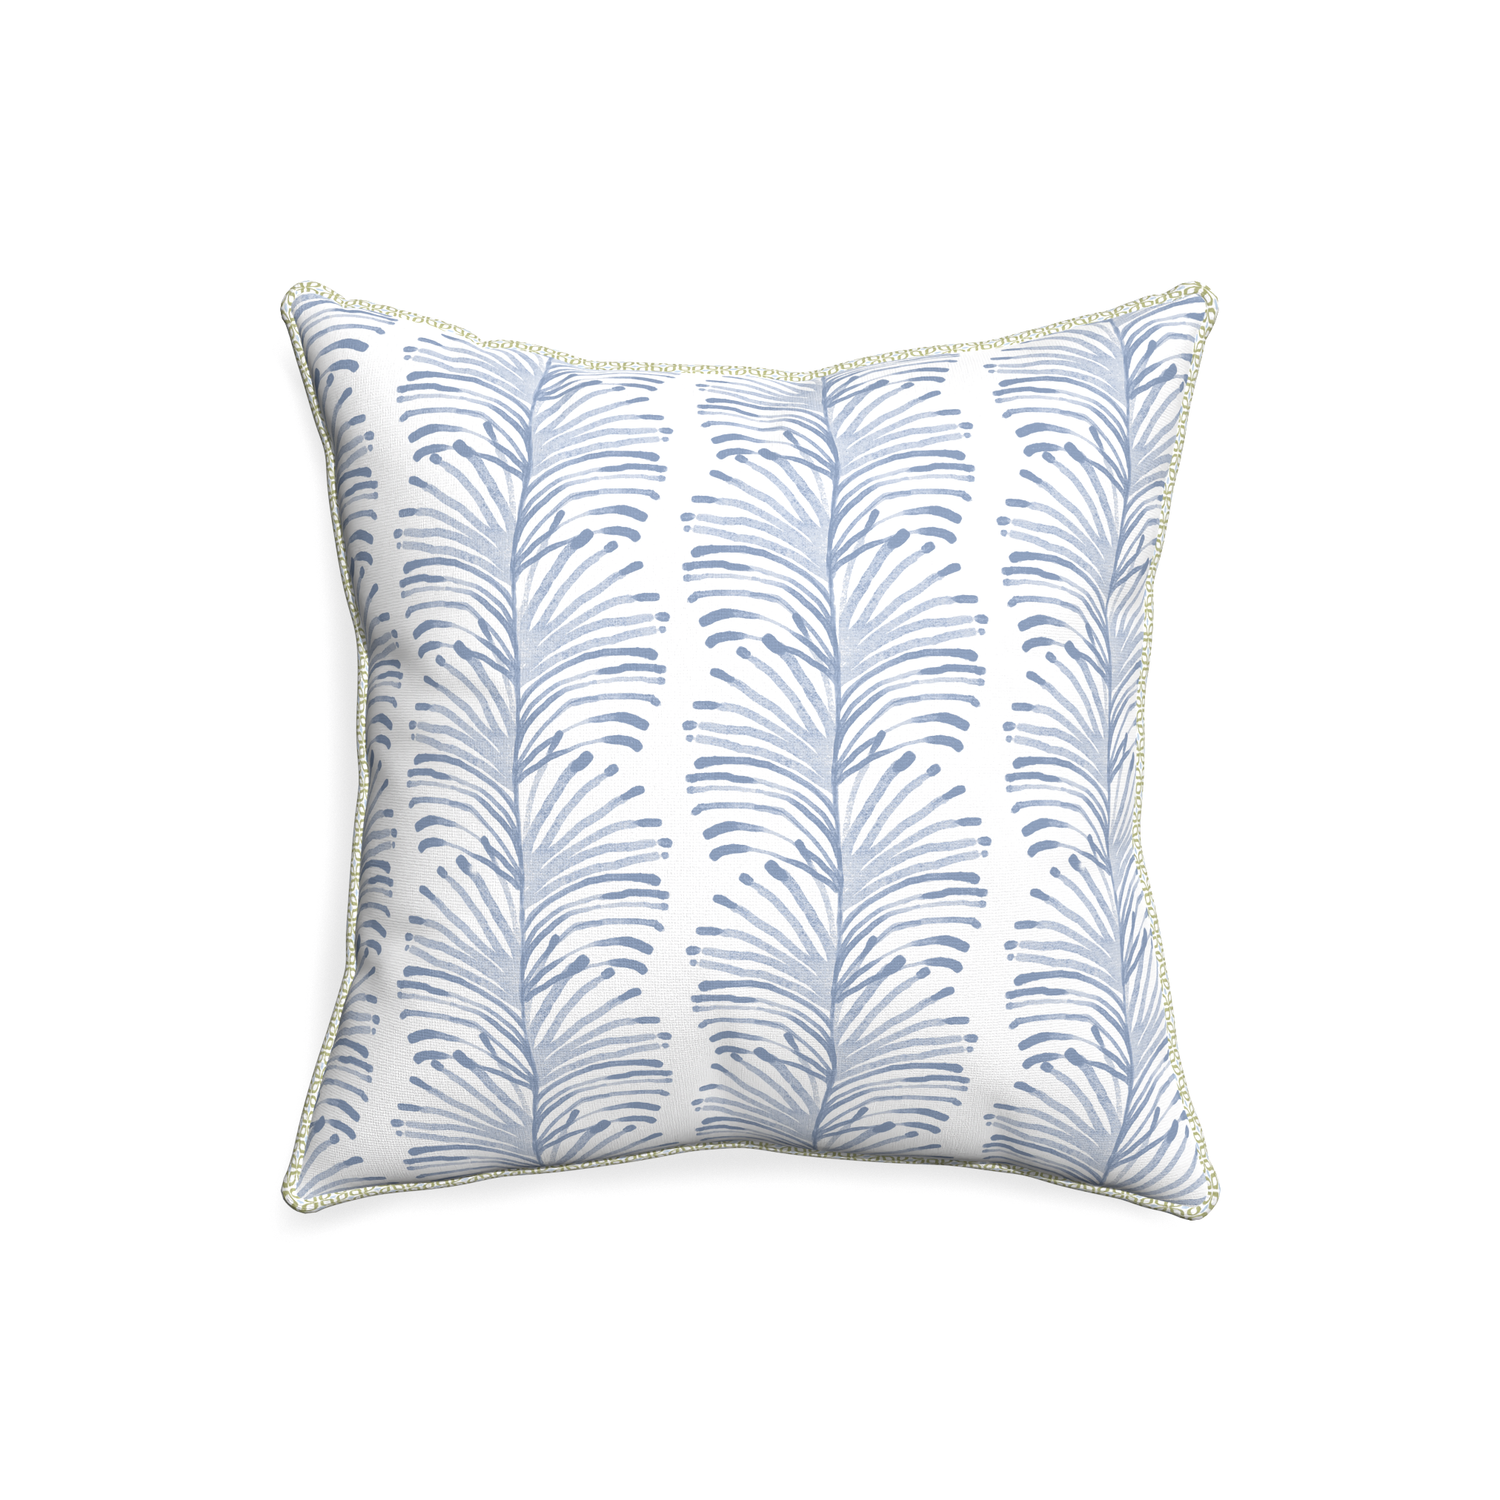 20-square emma sky custom pillow with l piping on white background